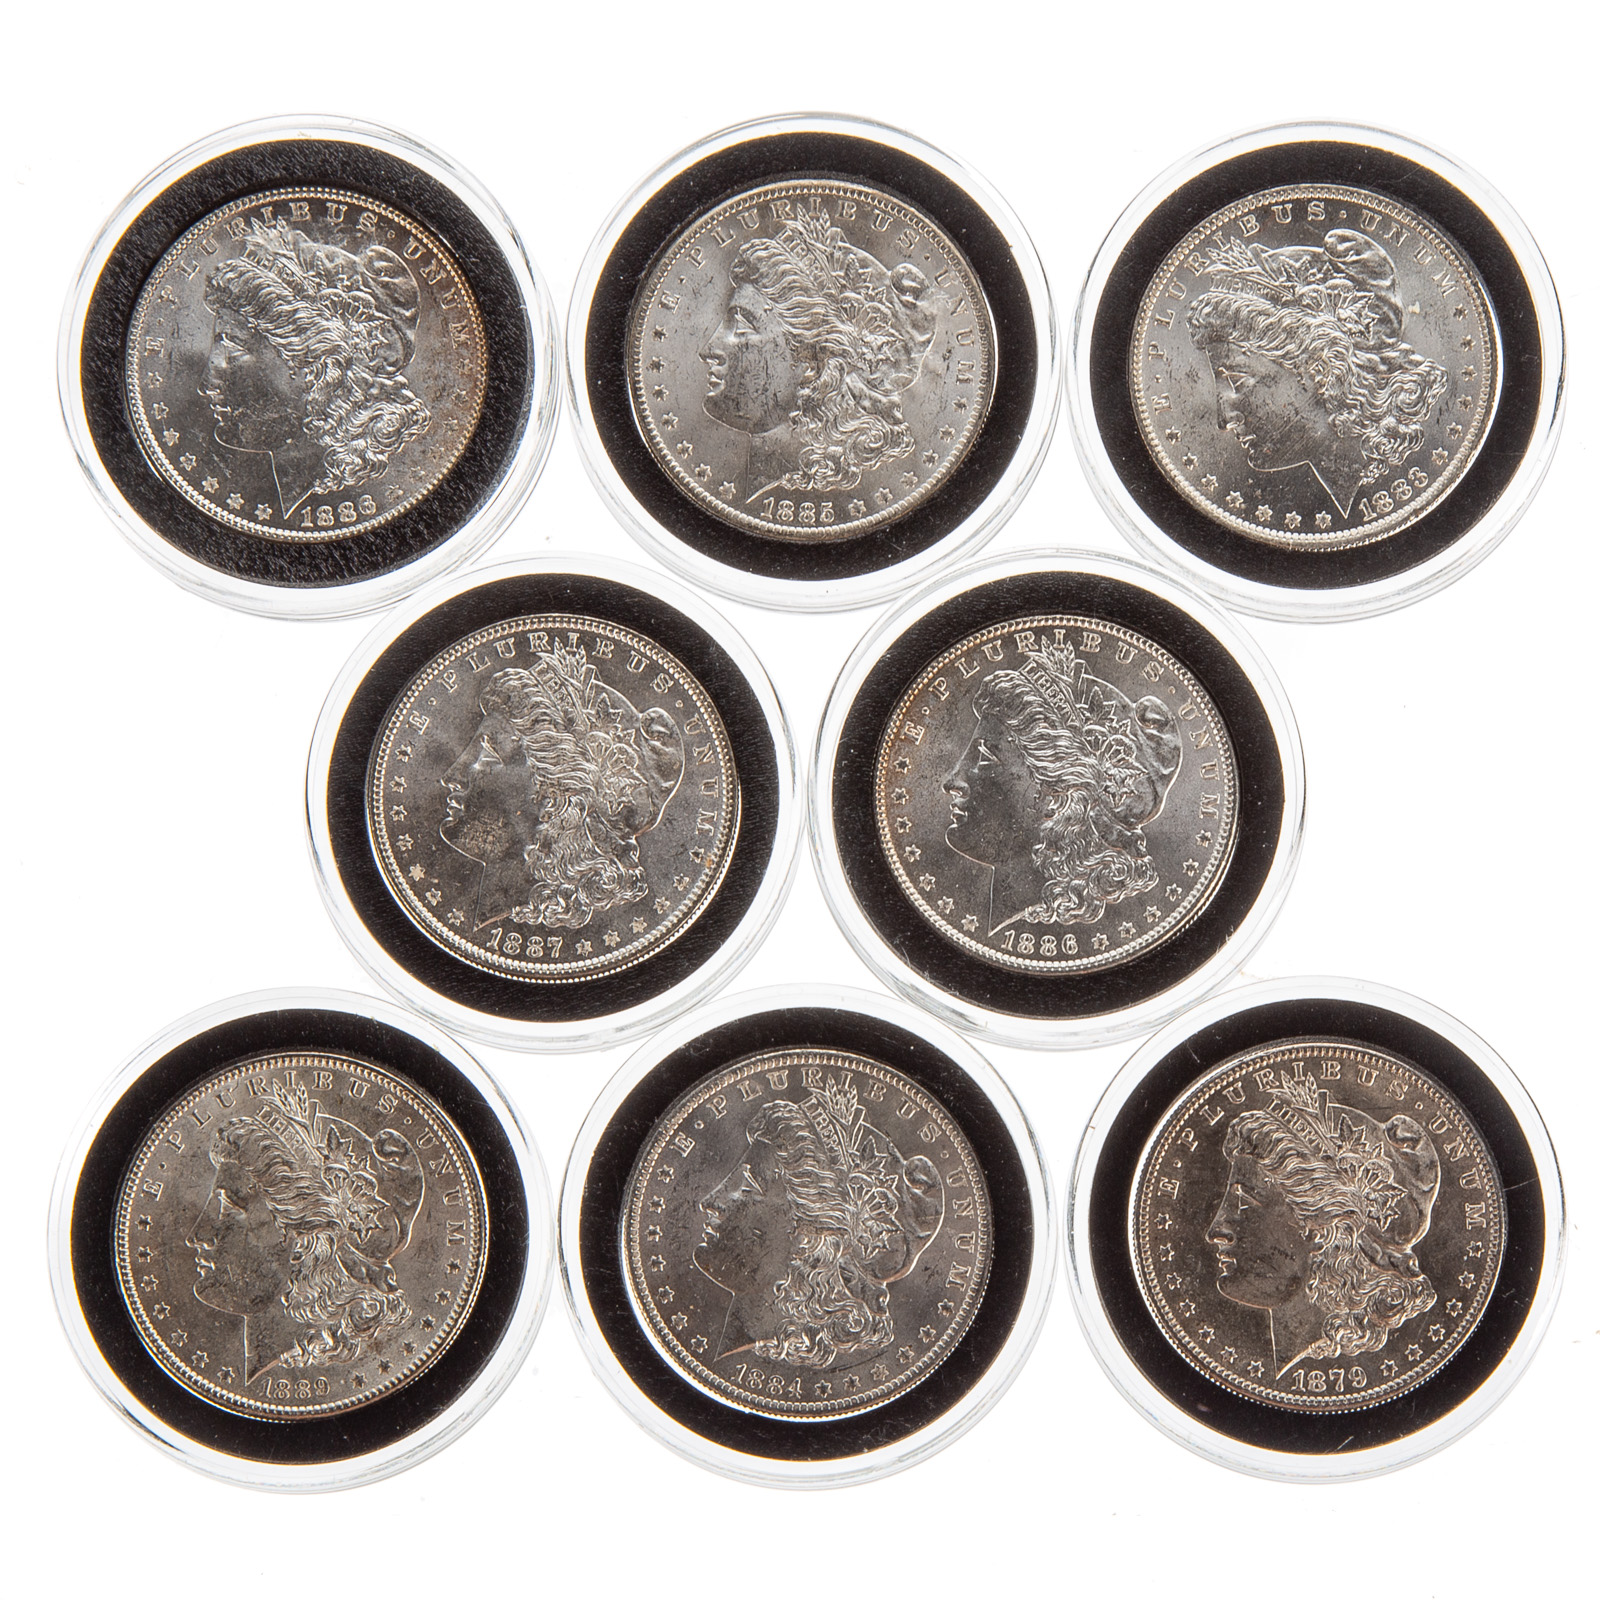 EIGHT DIFFERENT UNCIRCULATED MORGAN